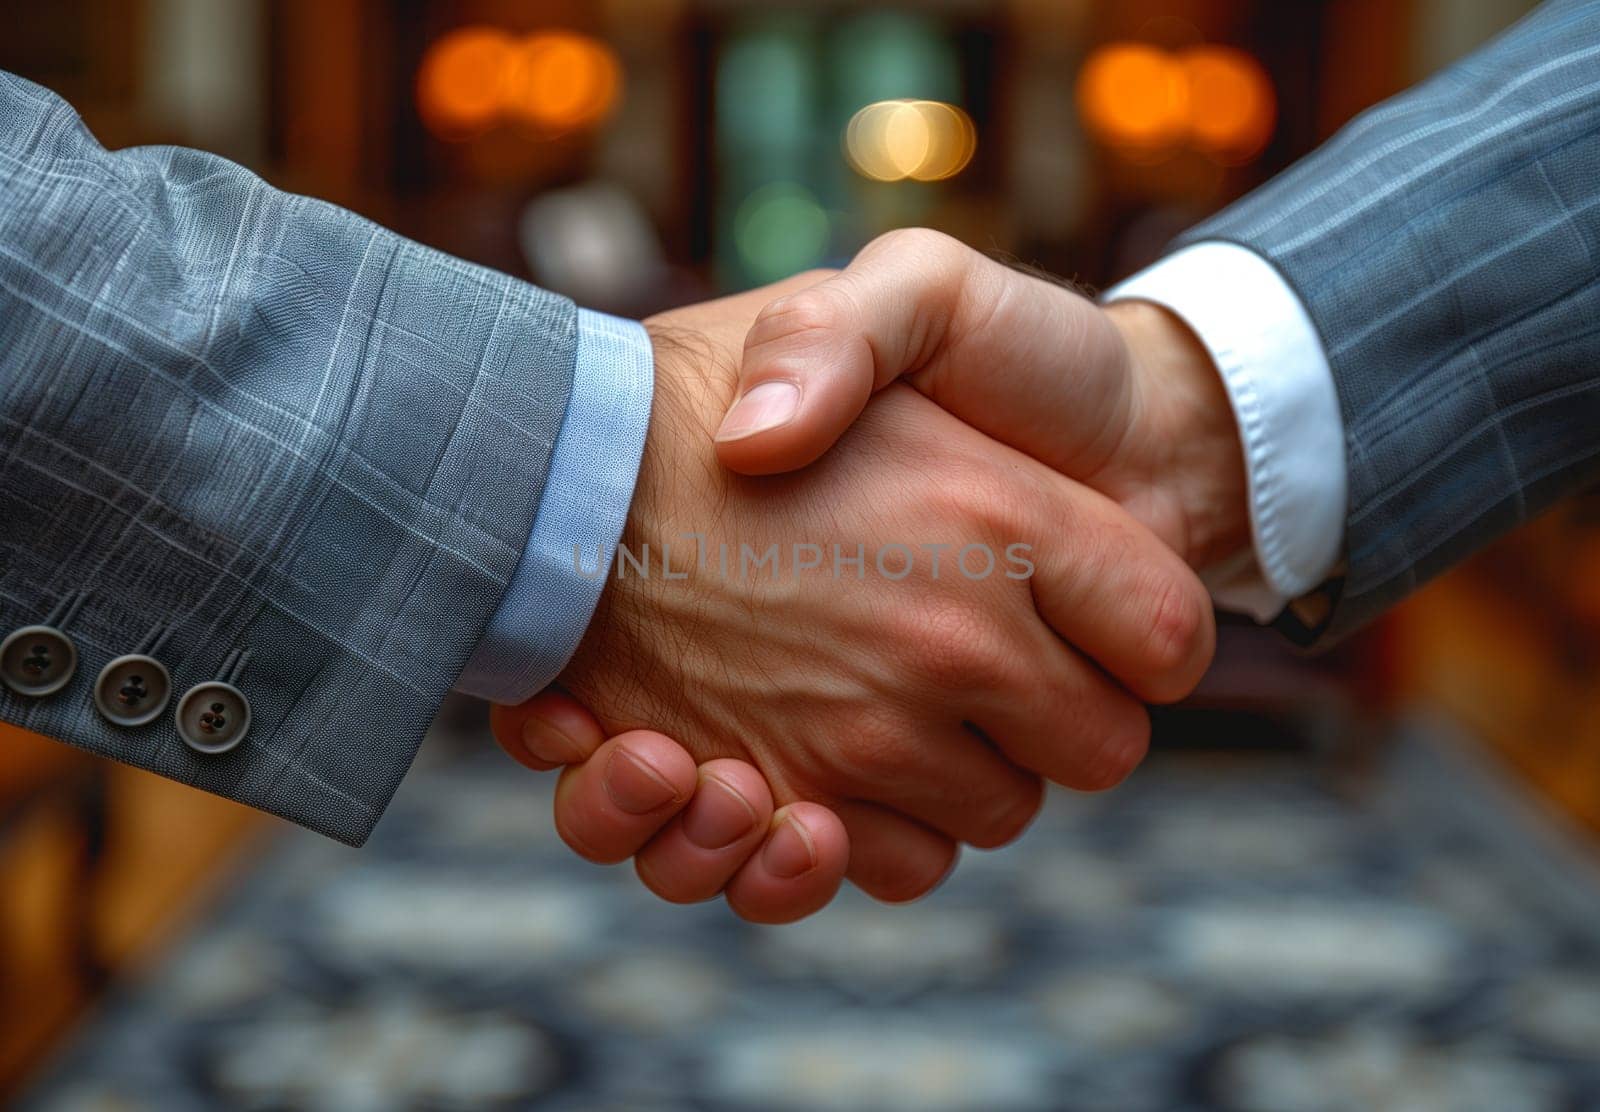 Two men in formal attire are exchanging a handshake in a room, their arms extending as they clasp hands in greeting